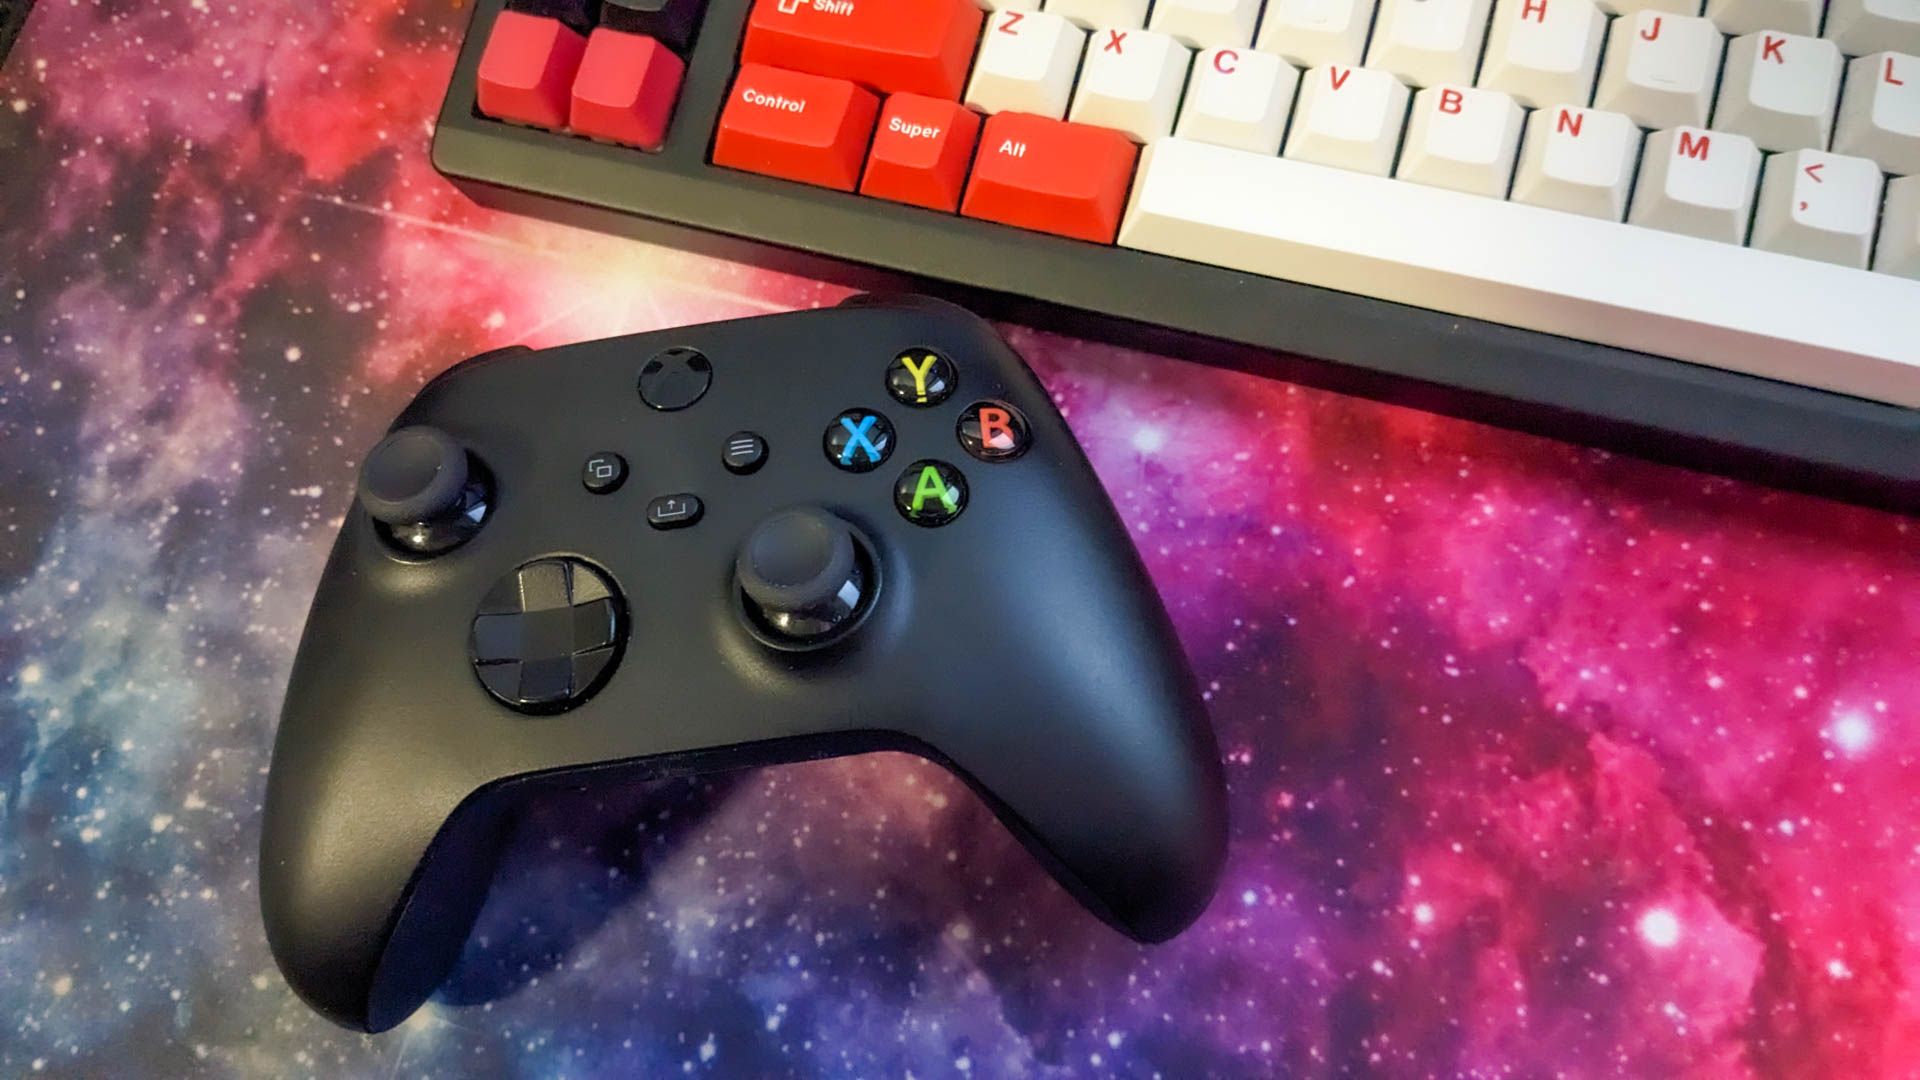 Xbox controller next to mechanical keyboard on space mousepad